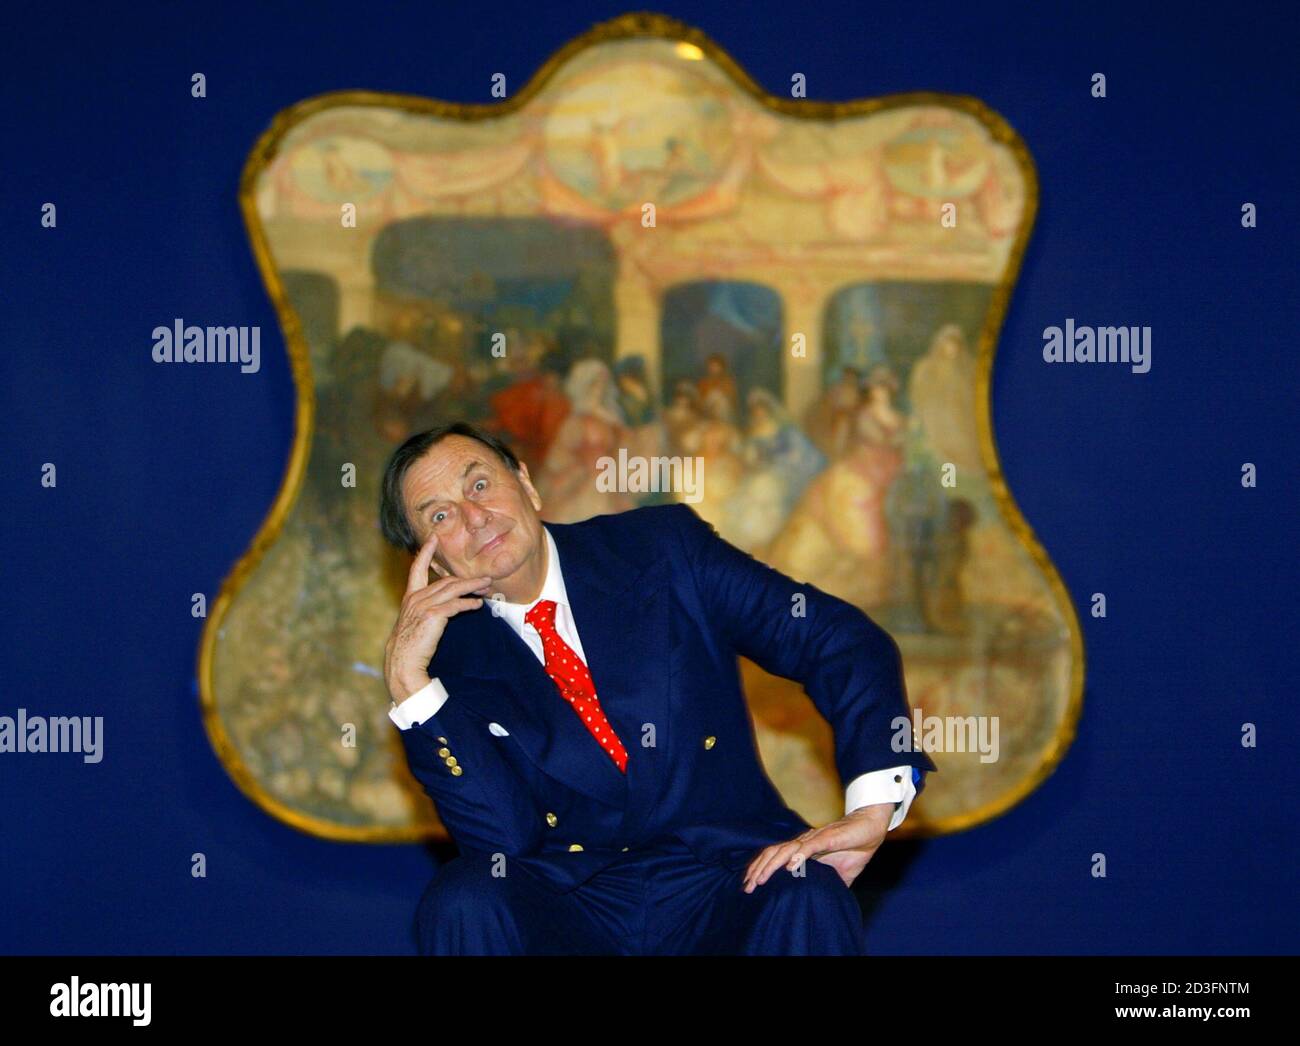 QUALITY REPEAT Australian comedian Barry Humphries poses in front of one of Australian artist Charles Condor's paintings at the launch of his retrospective at the New South Wales Art Gallery in Sydney June 12, 2003. Humphries, who owns alot of the works in the show, officially opened the exhibition which inlcudes 112 paintings of the world-renowned artist's watercolours, drawings and prints. REUTERS/David Gray  DG/CP Stock Photo